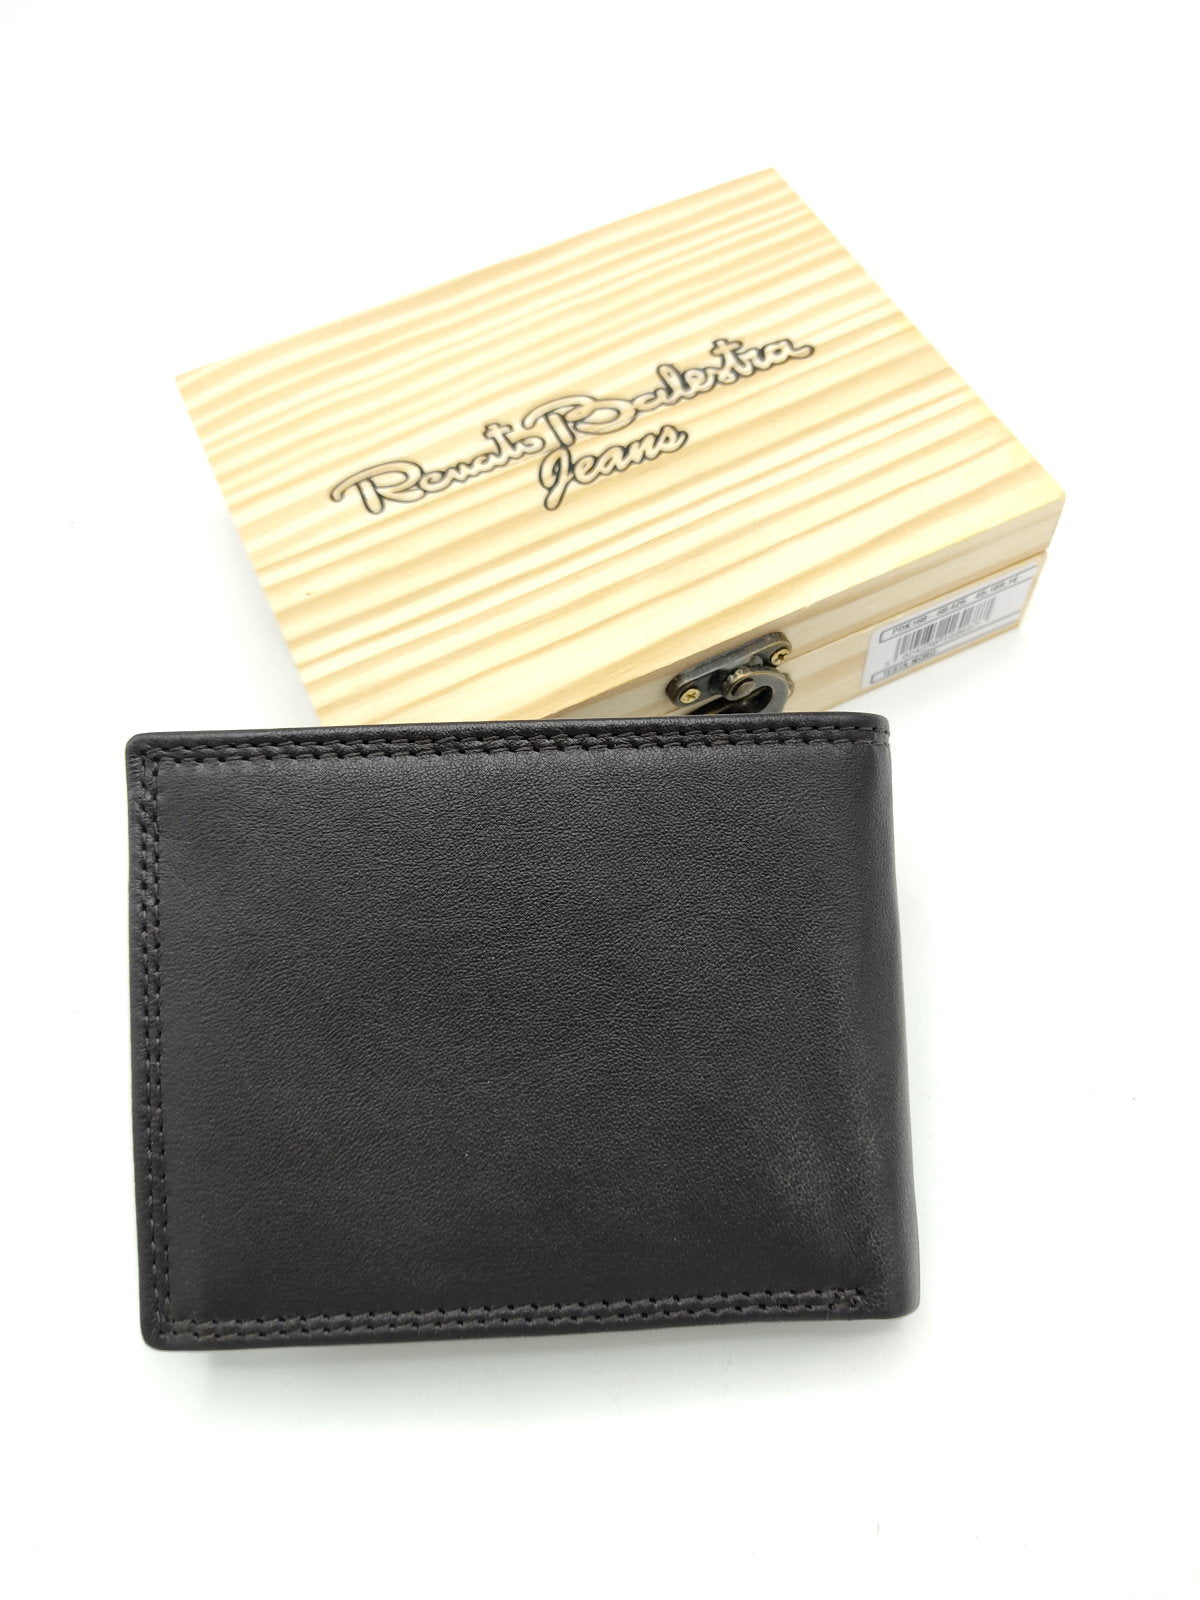 Genuine leather wallet for Men, Brand Renato Balestra Jeans, with wooden box, art. PDK160-68.425